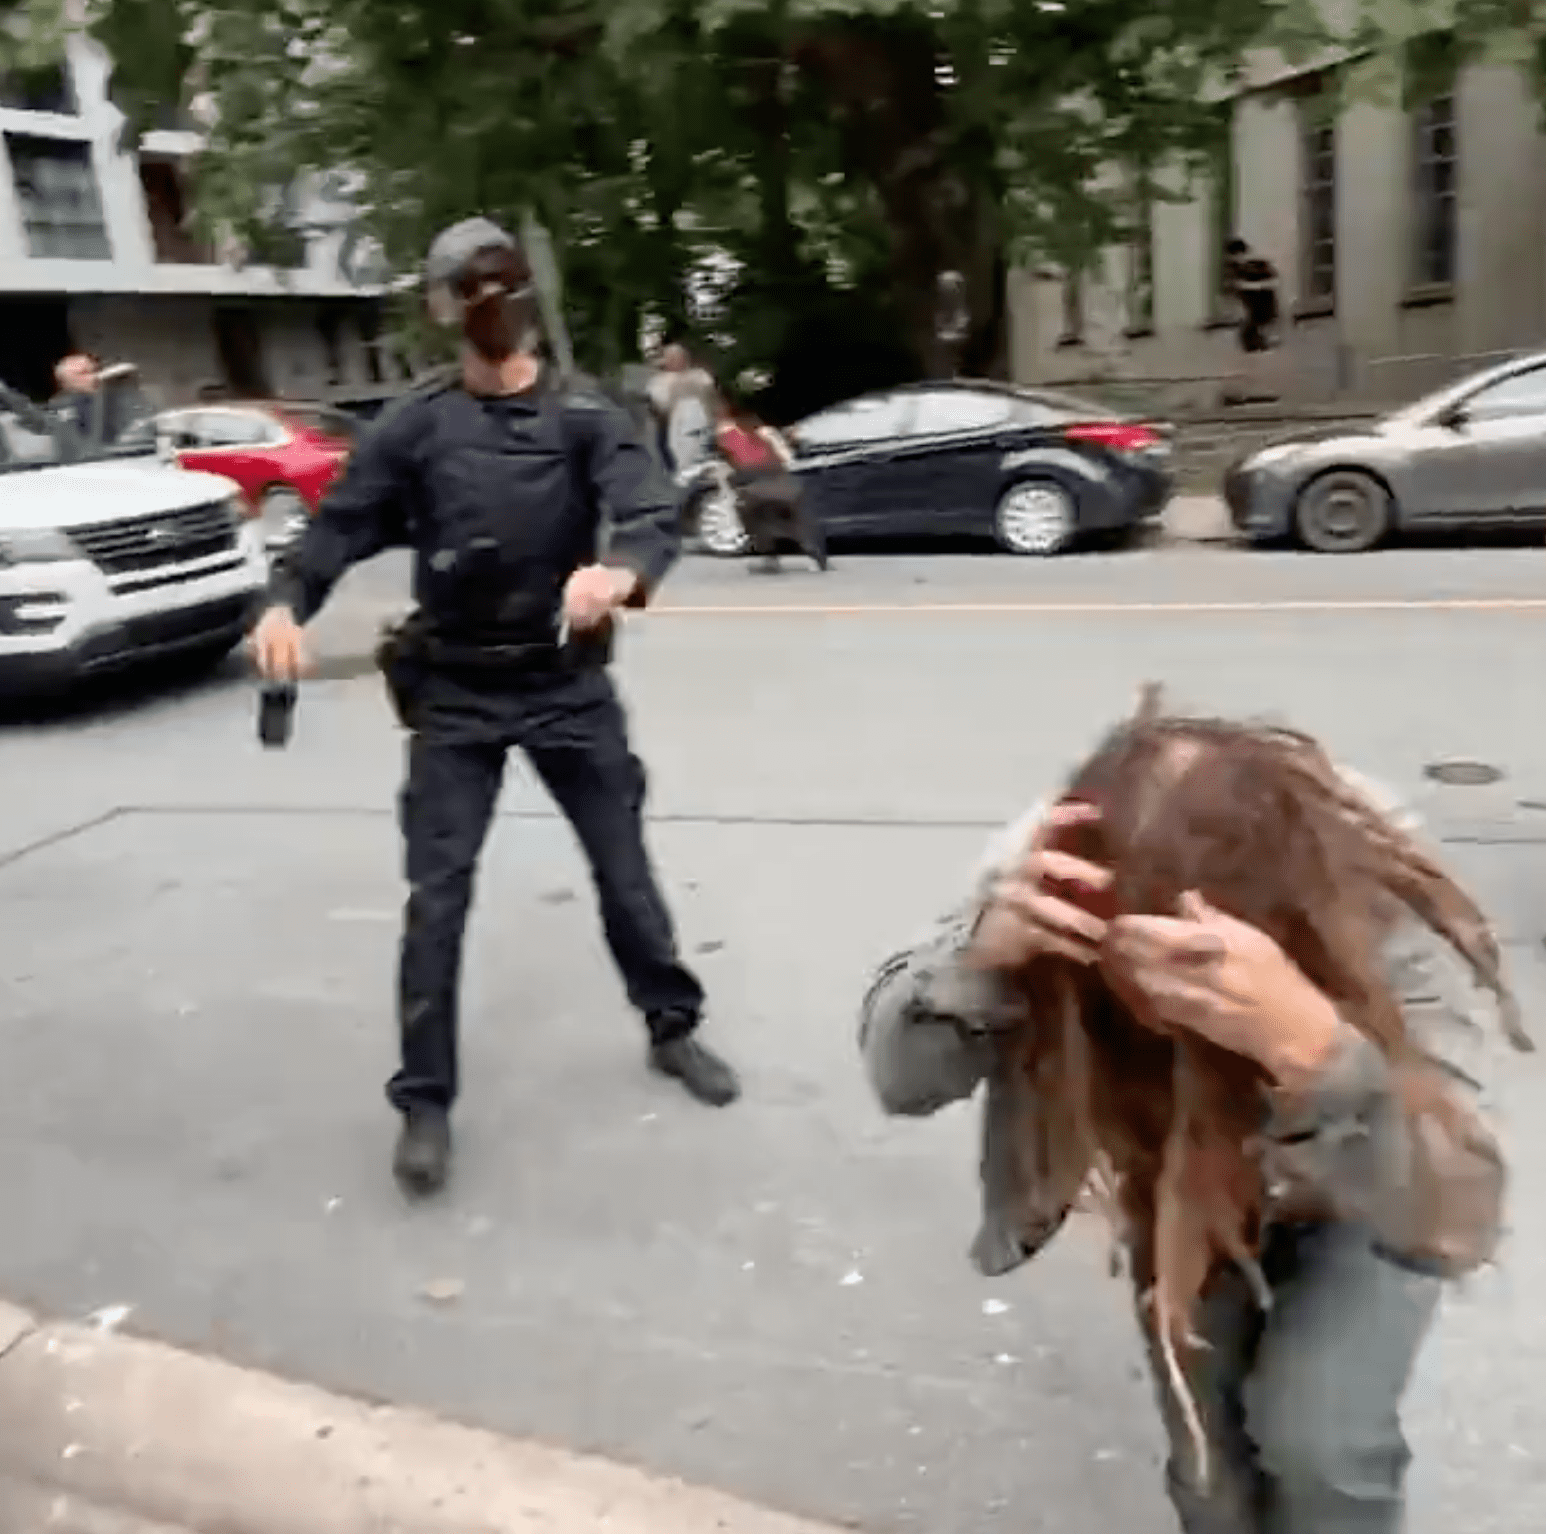 A protestor covers their face and runs away from a police officer | Photo: Twitter/zwoodford